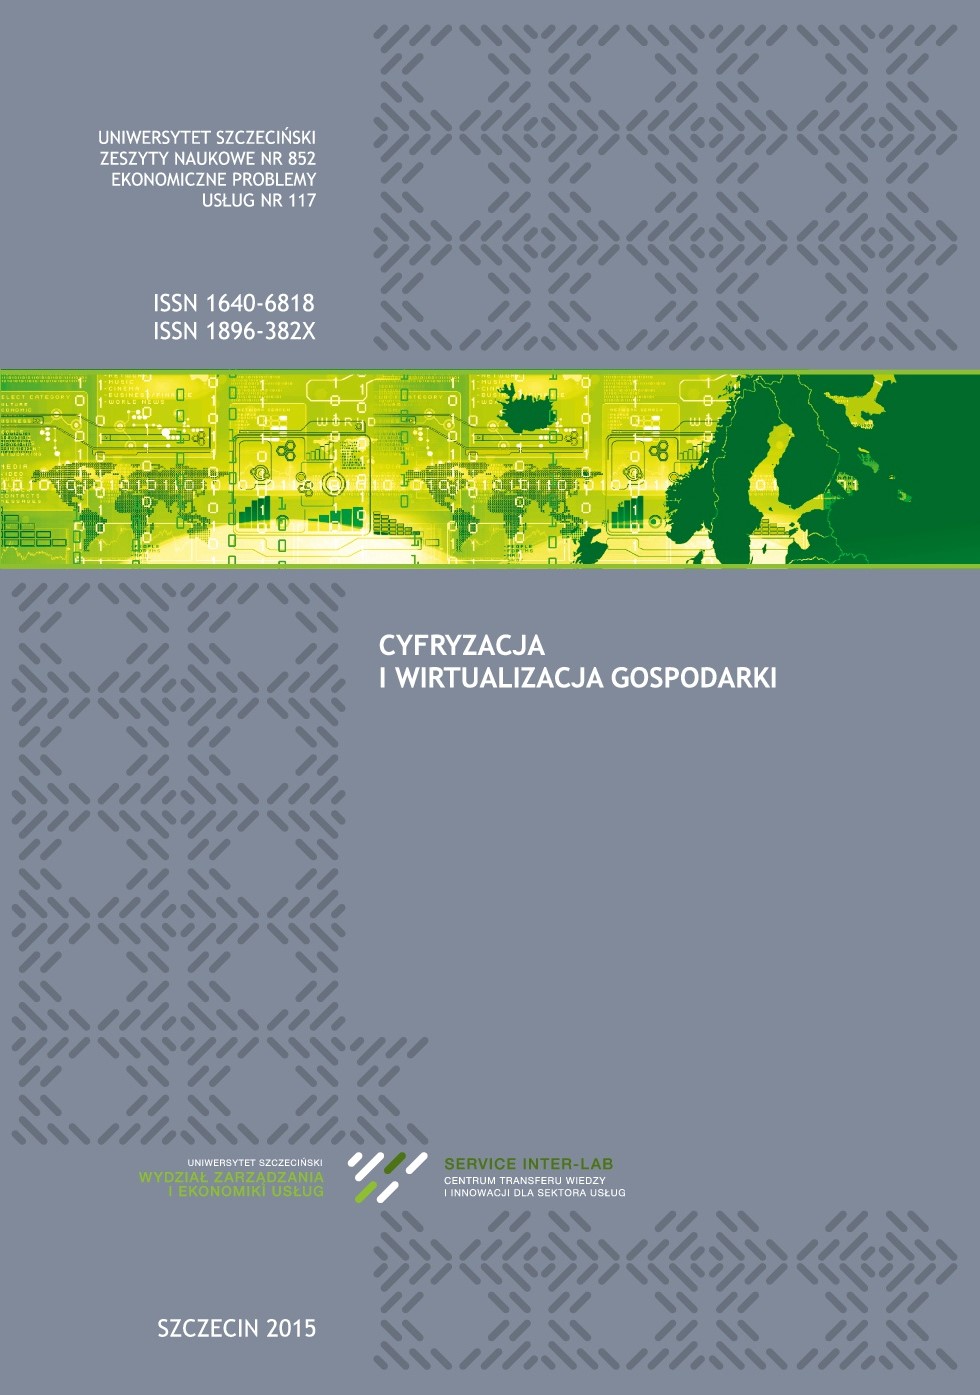 Selected Elements Related With the Development of Information Society in Western Pomerania Cover Image